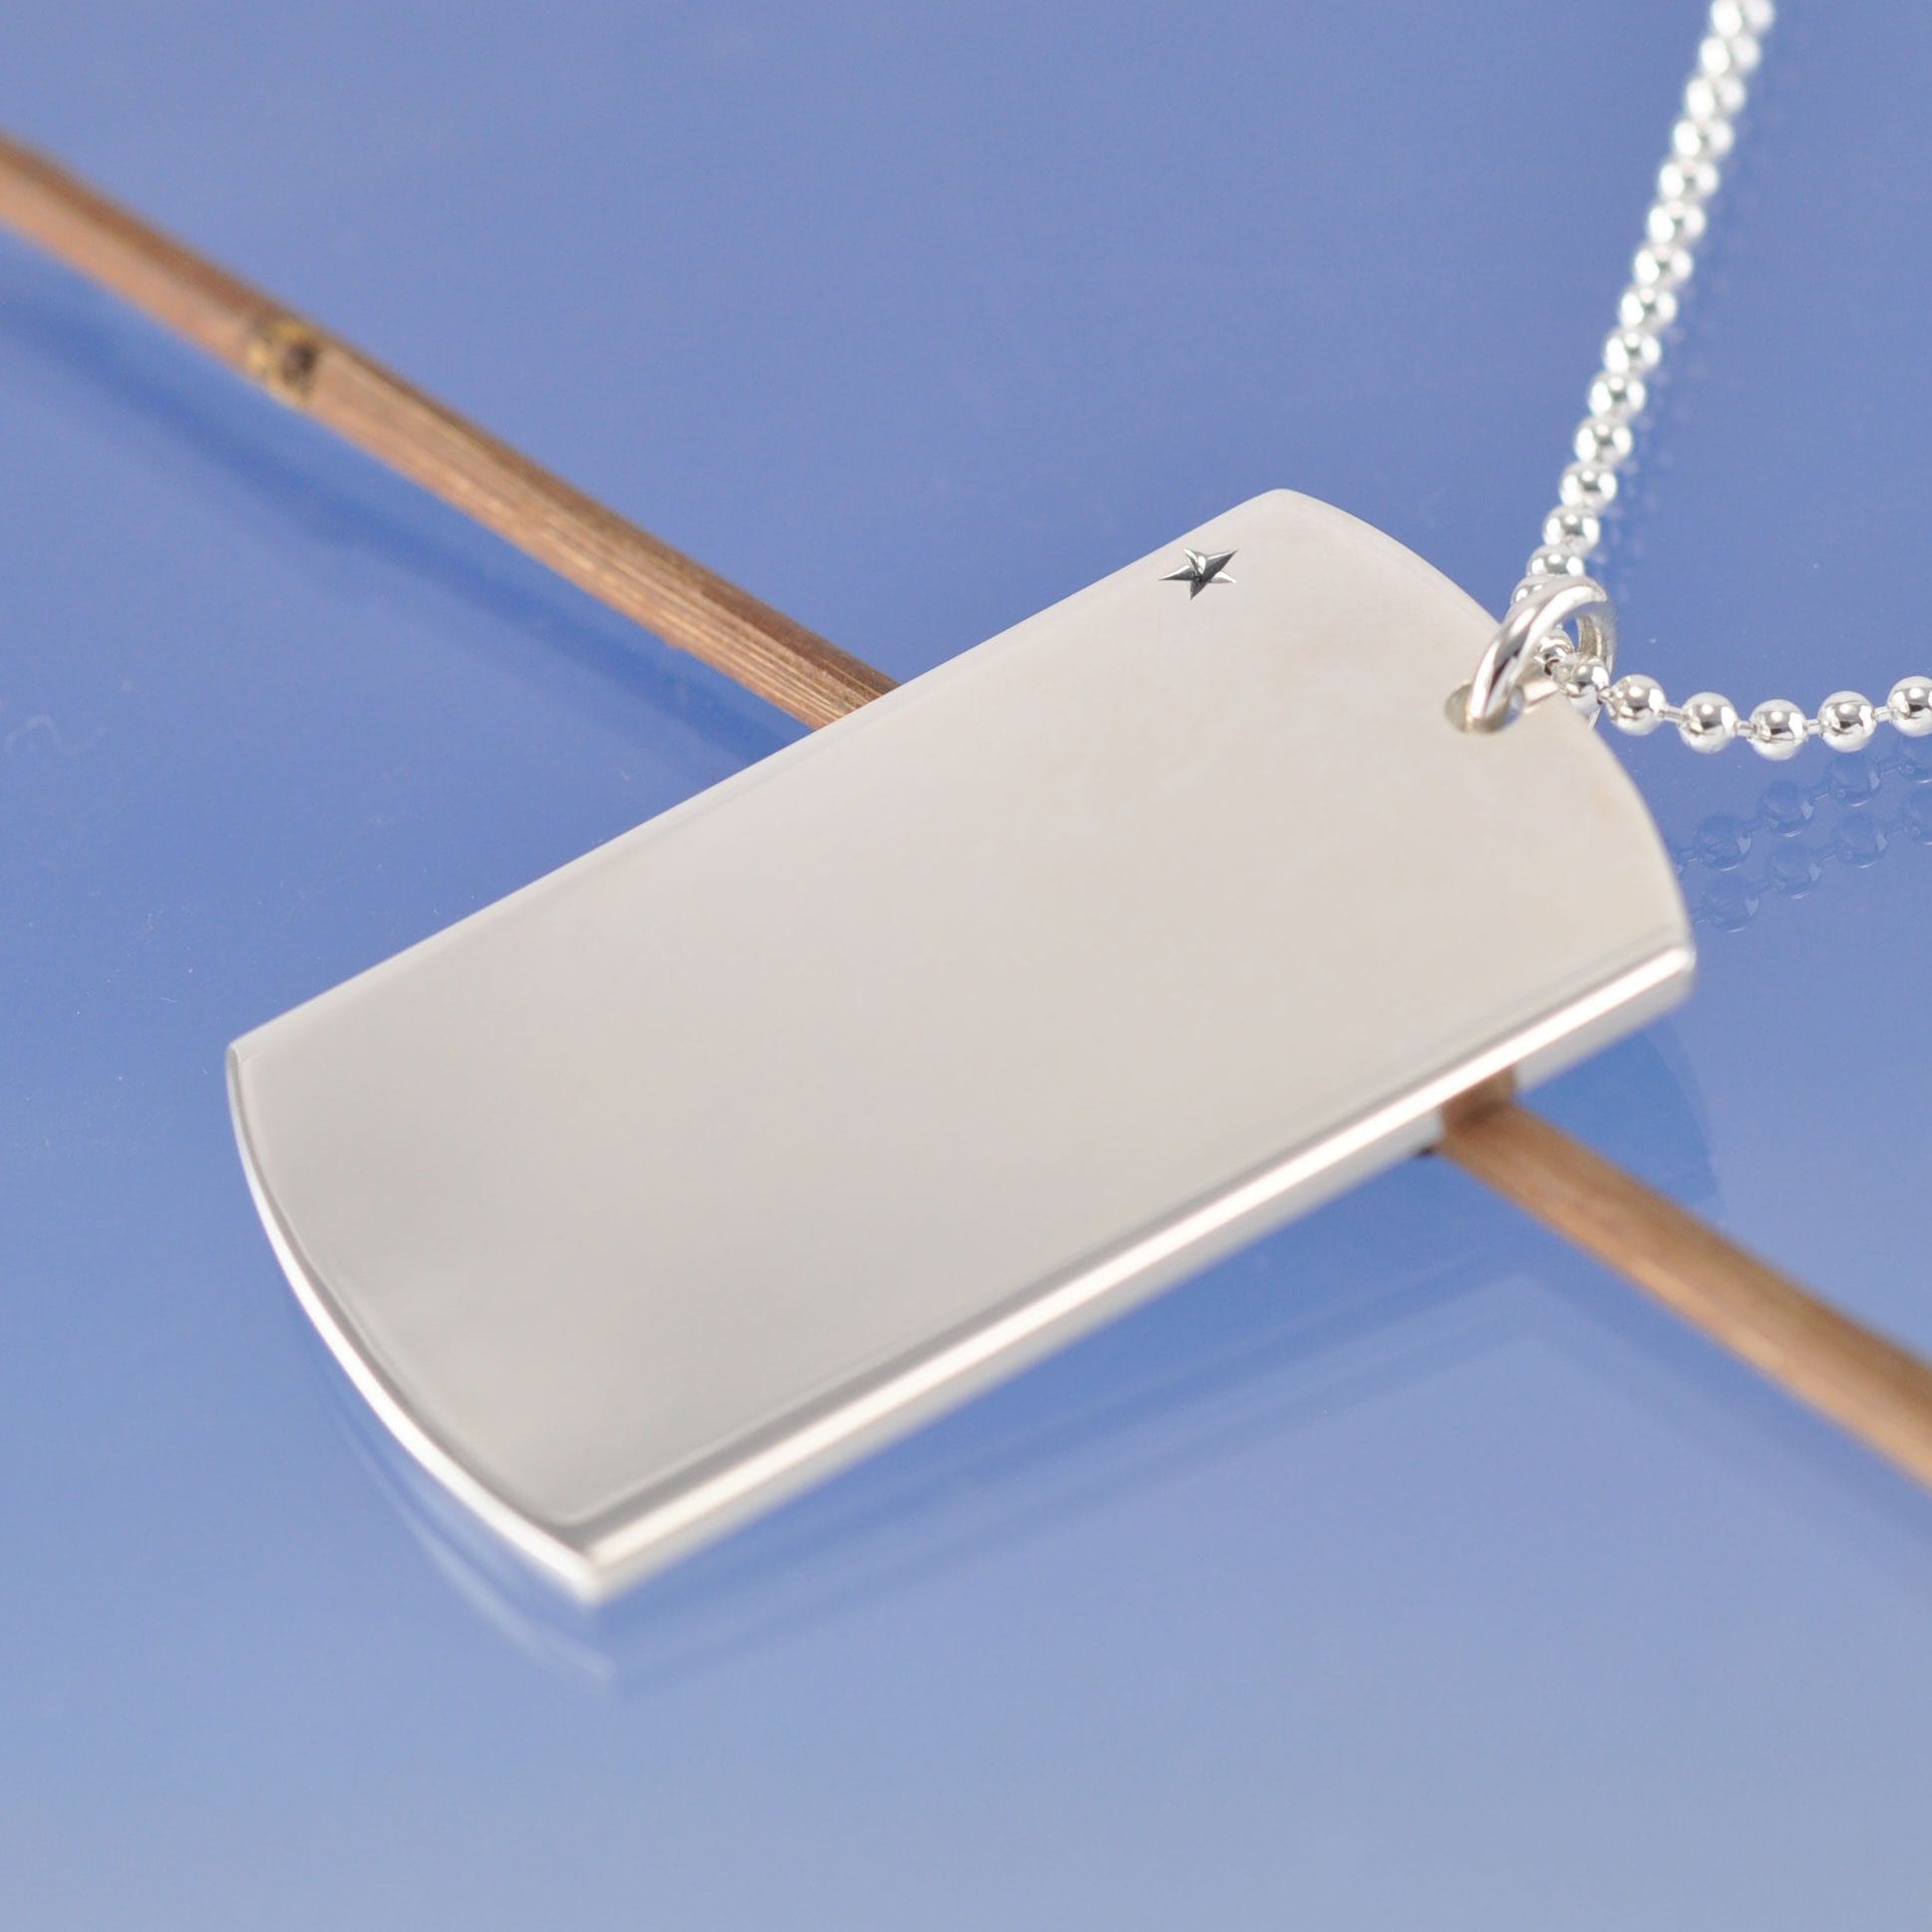 Cremated Ashes Dog Tag Necklace Pendant by Chris Parry Jewellery